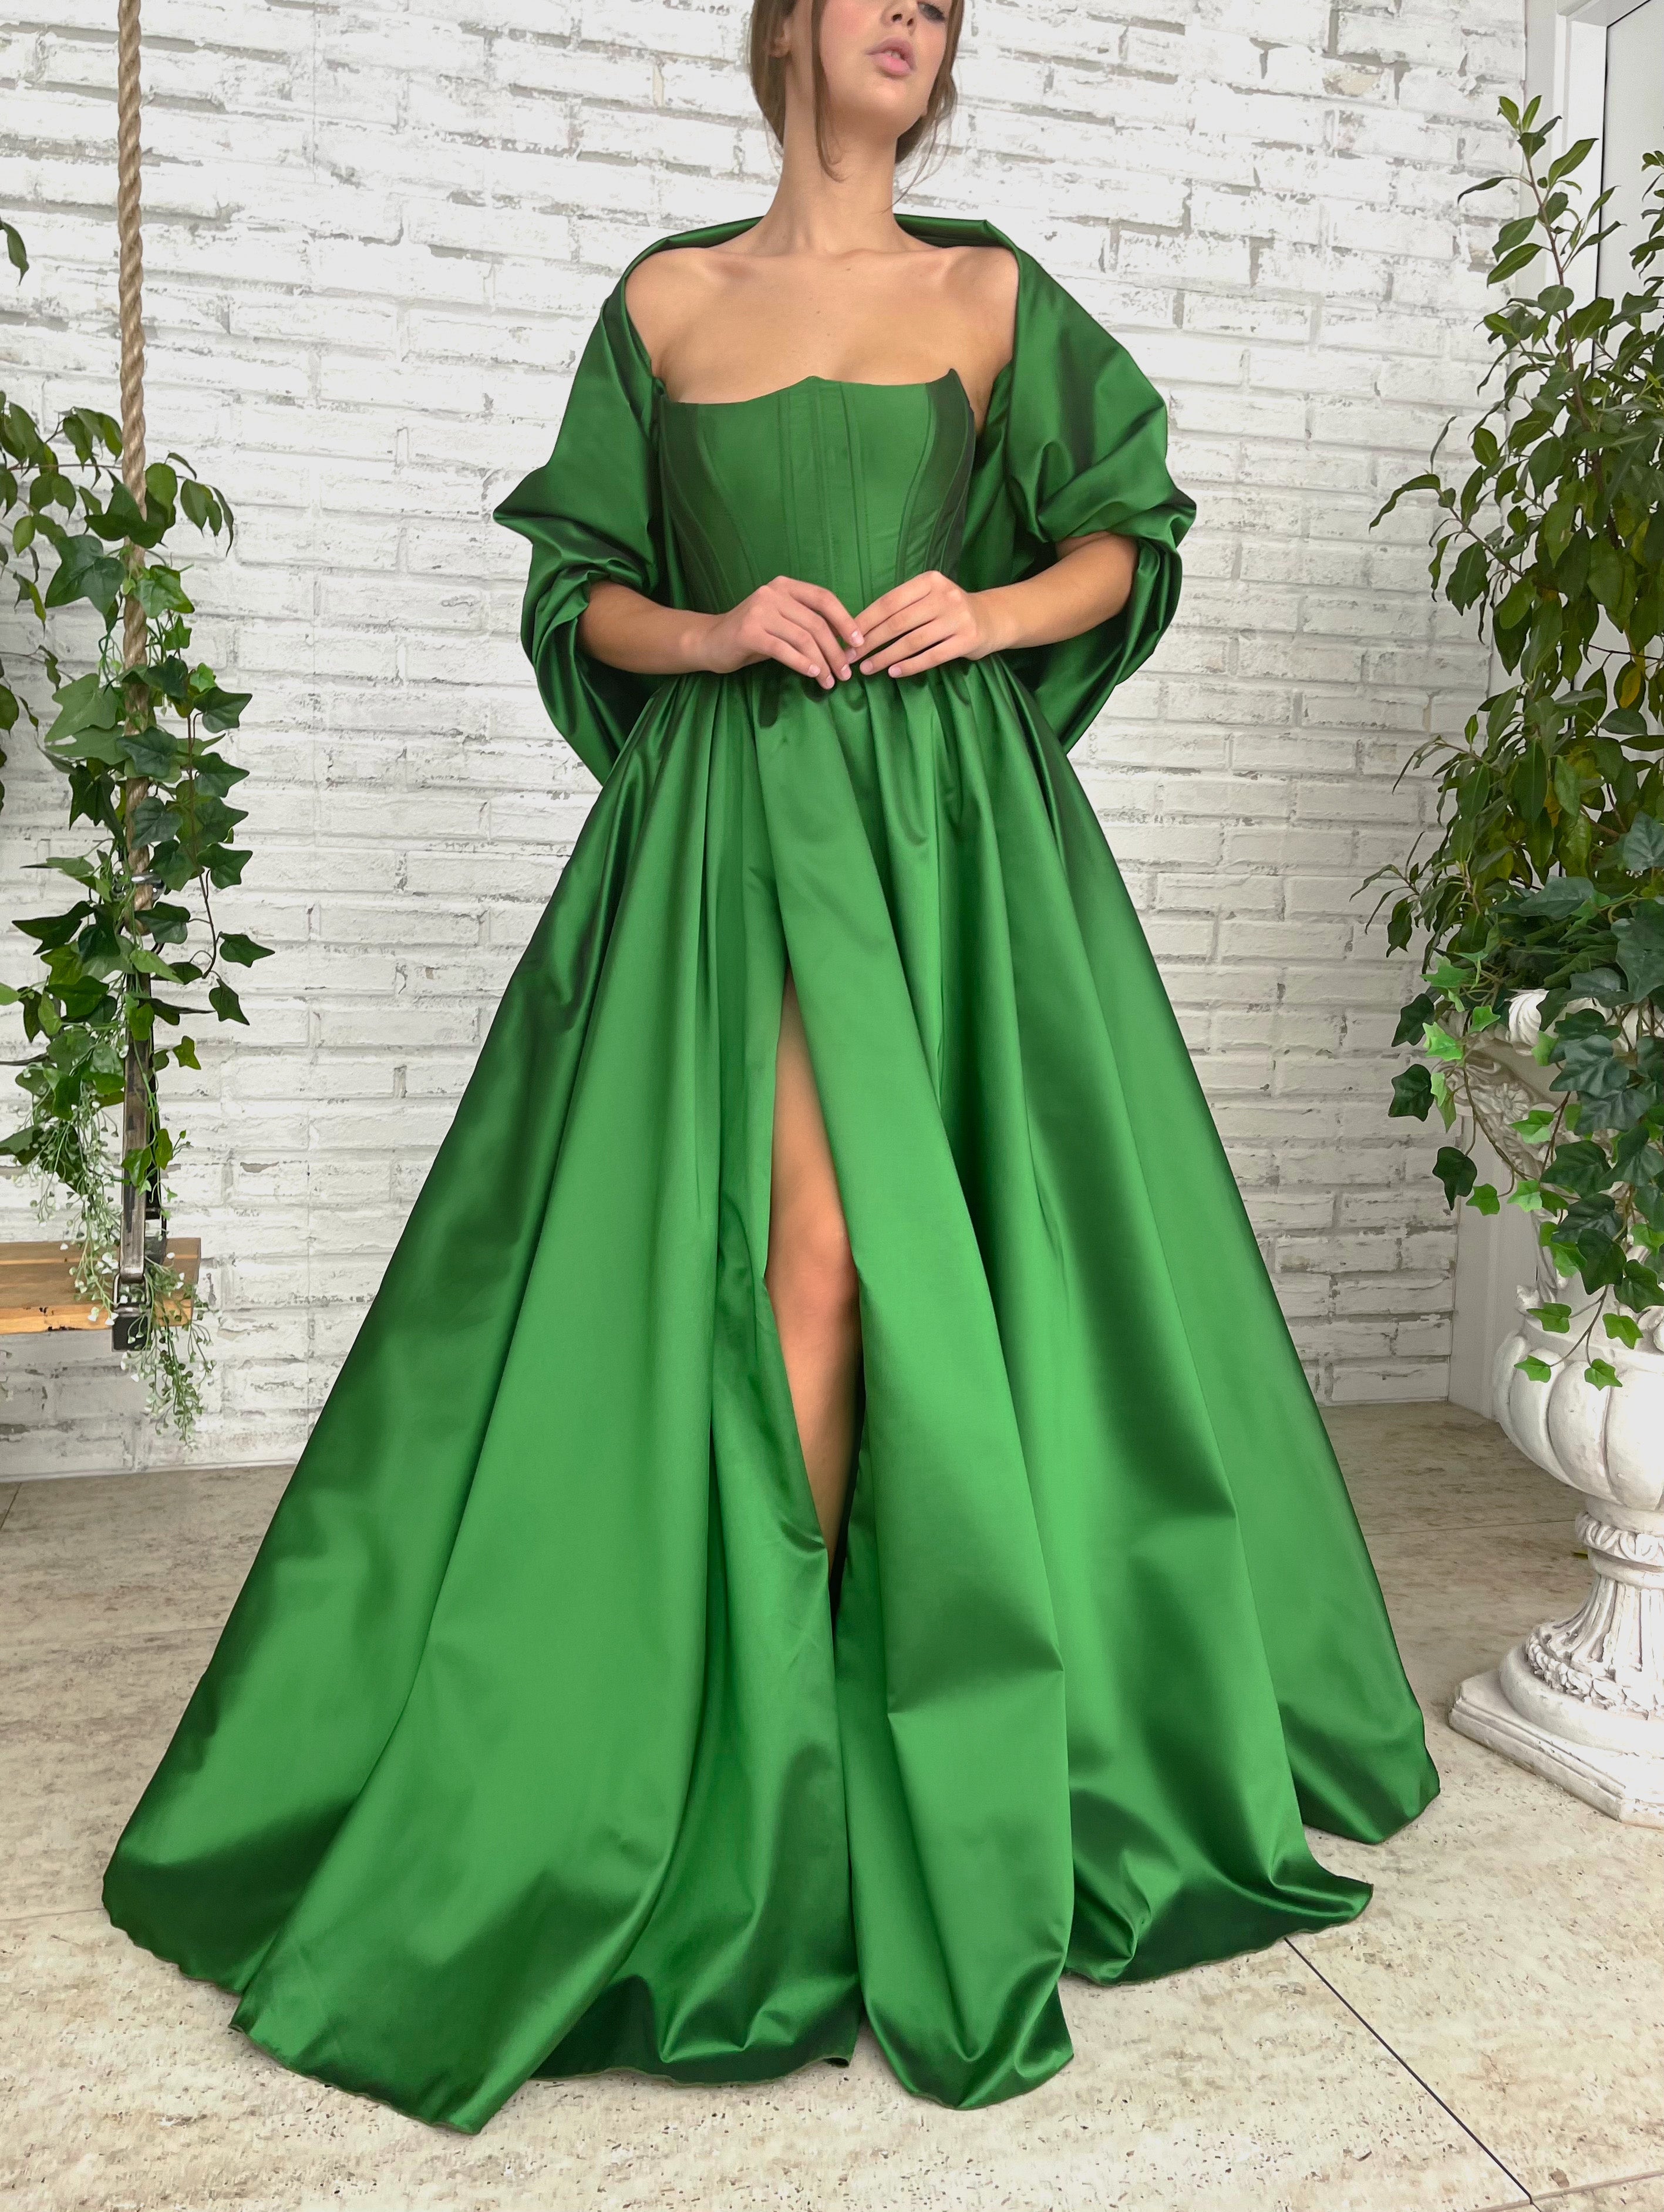 Forest Green Prom Dresses with Beading · dressydances · Online Store  Powered by Storenvy